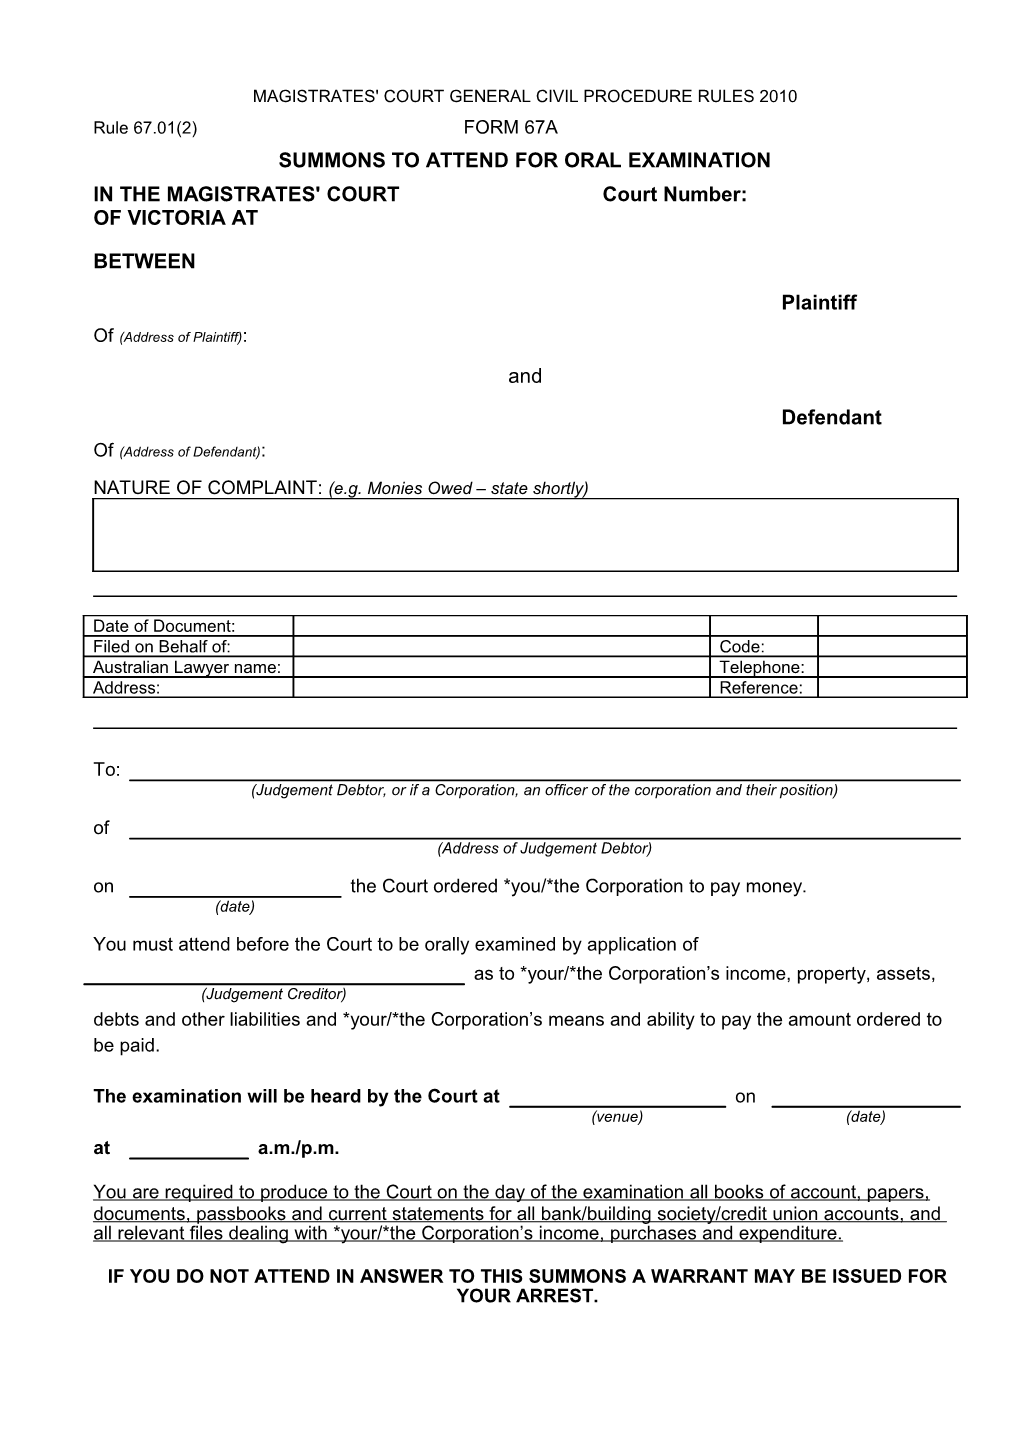 Form 67A - Summons for Oral Exam (Word 79KB)